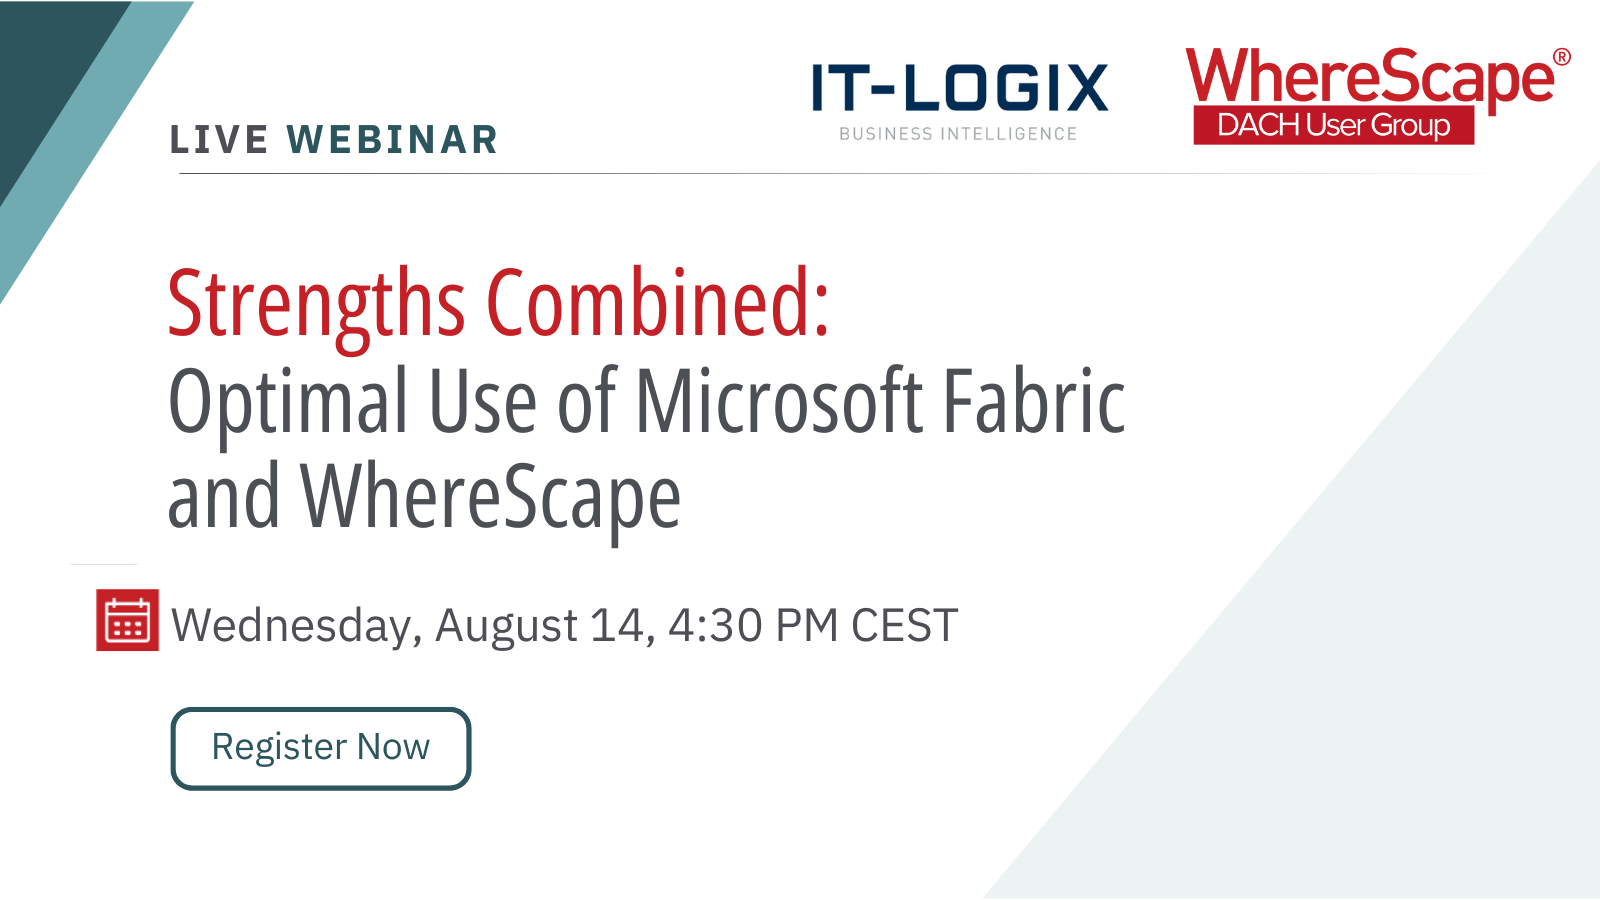 IT-Logix Partner Webinar | Strengths Combined: Optimal Use of Microsoft Fabric and WhereScape